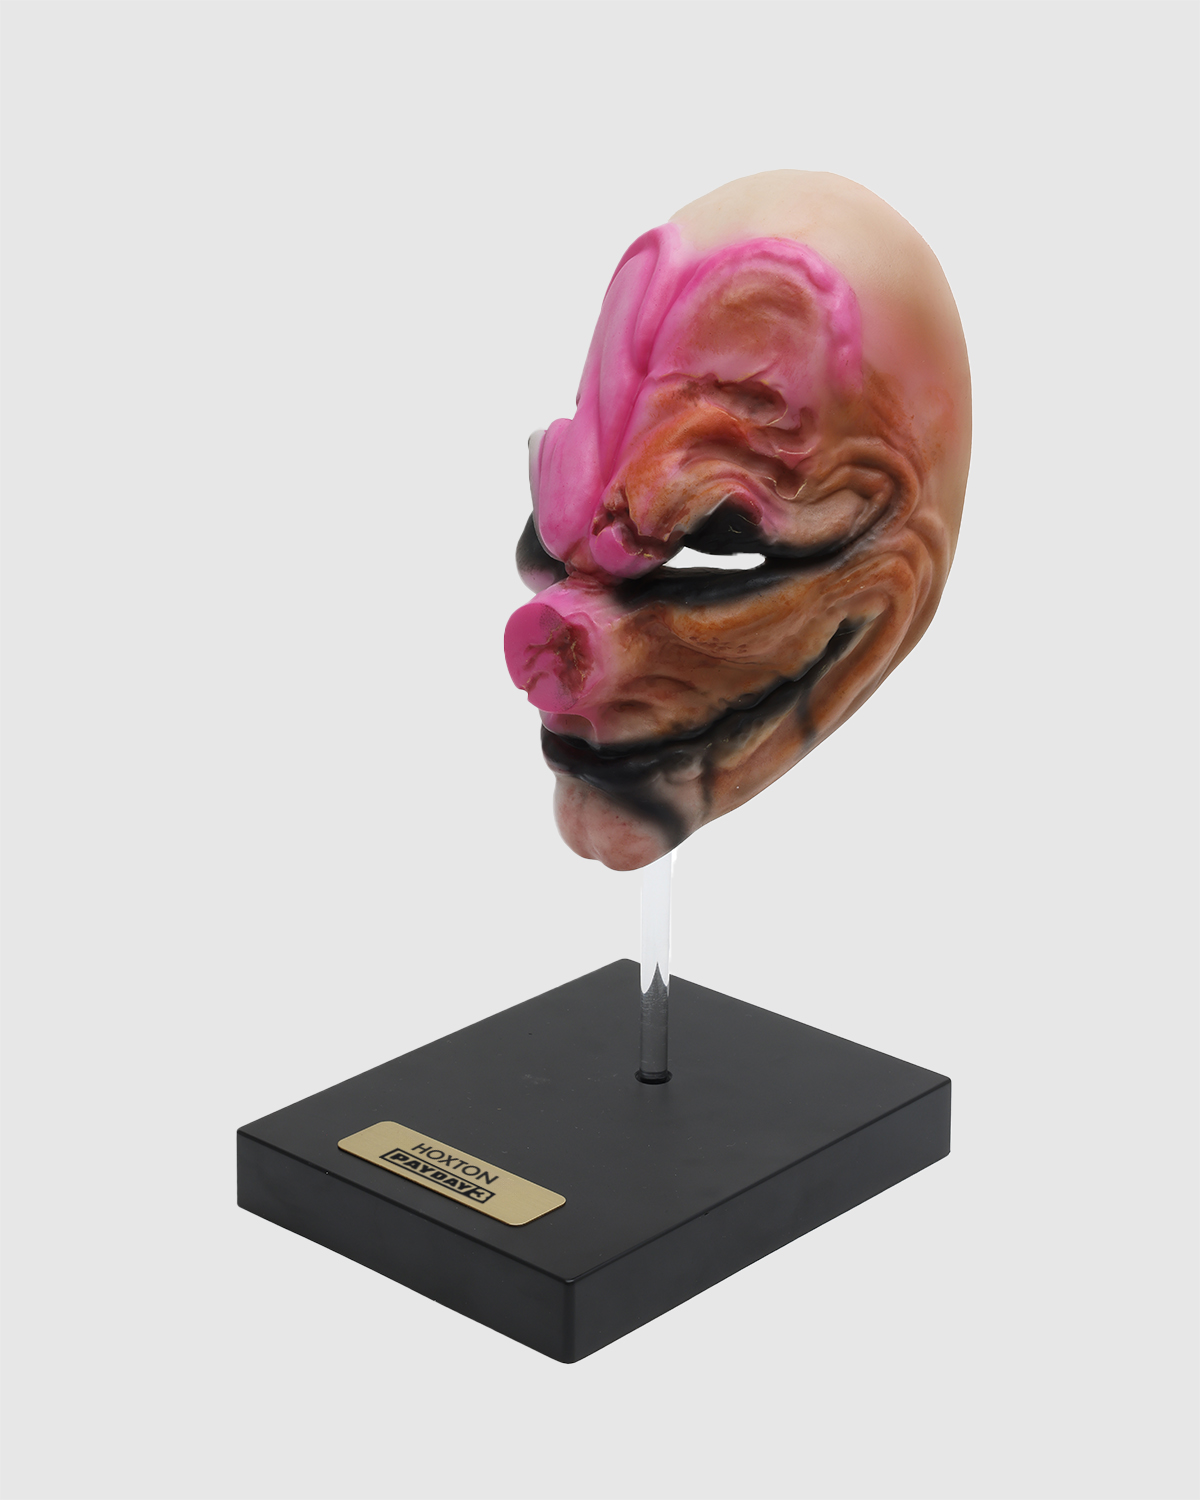 Limited Edition 1:2 scale Desktop Replica "Hoxton Mask"